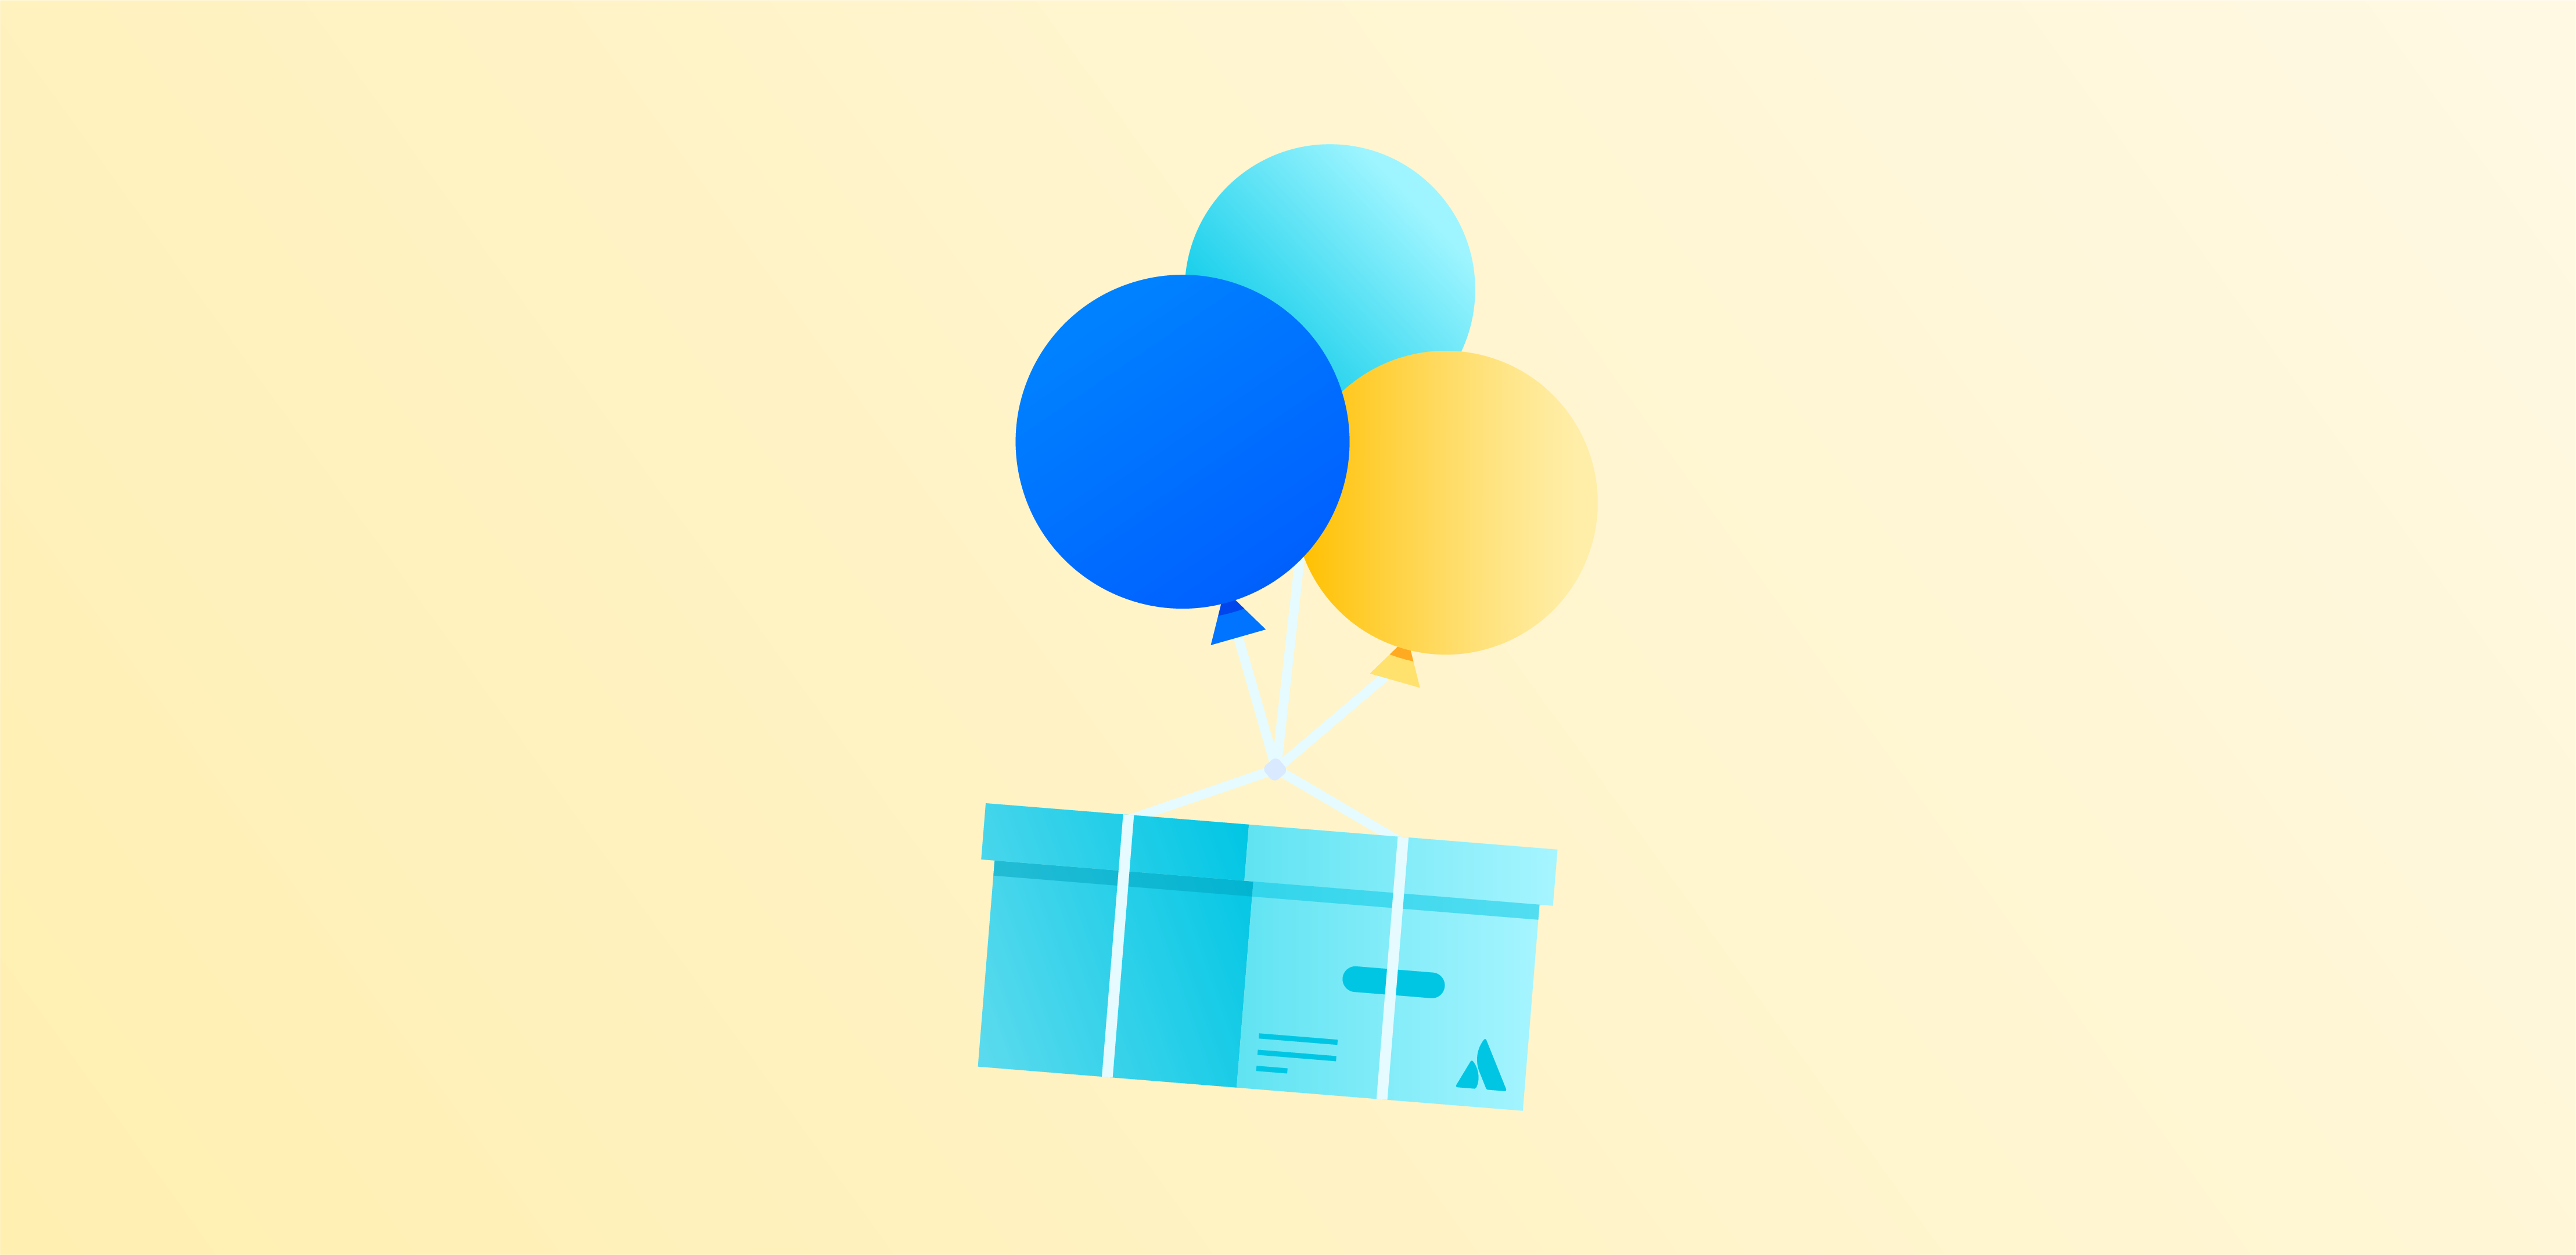 Balloons carrying a crate